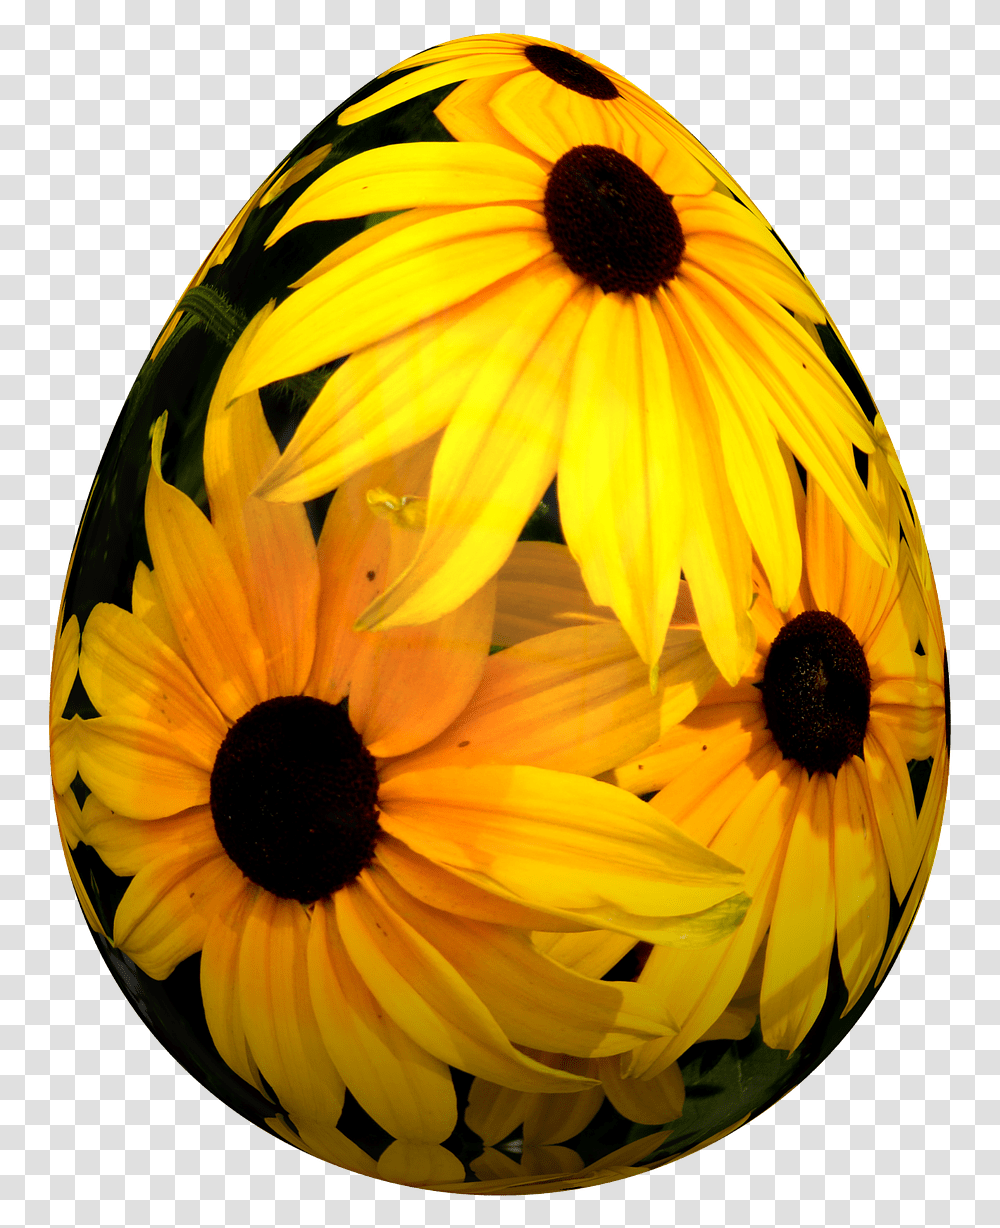 Easter Flowers, Plant, Blossom, Daisy, Daisies Transparent Png